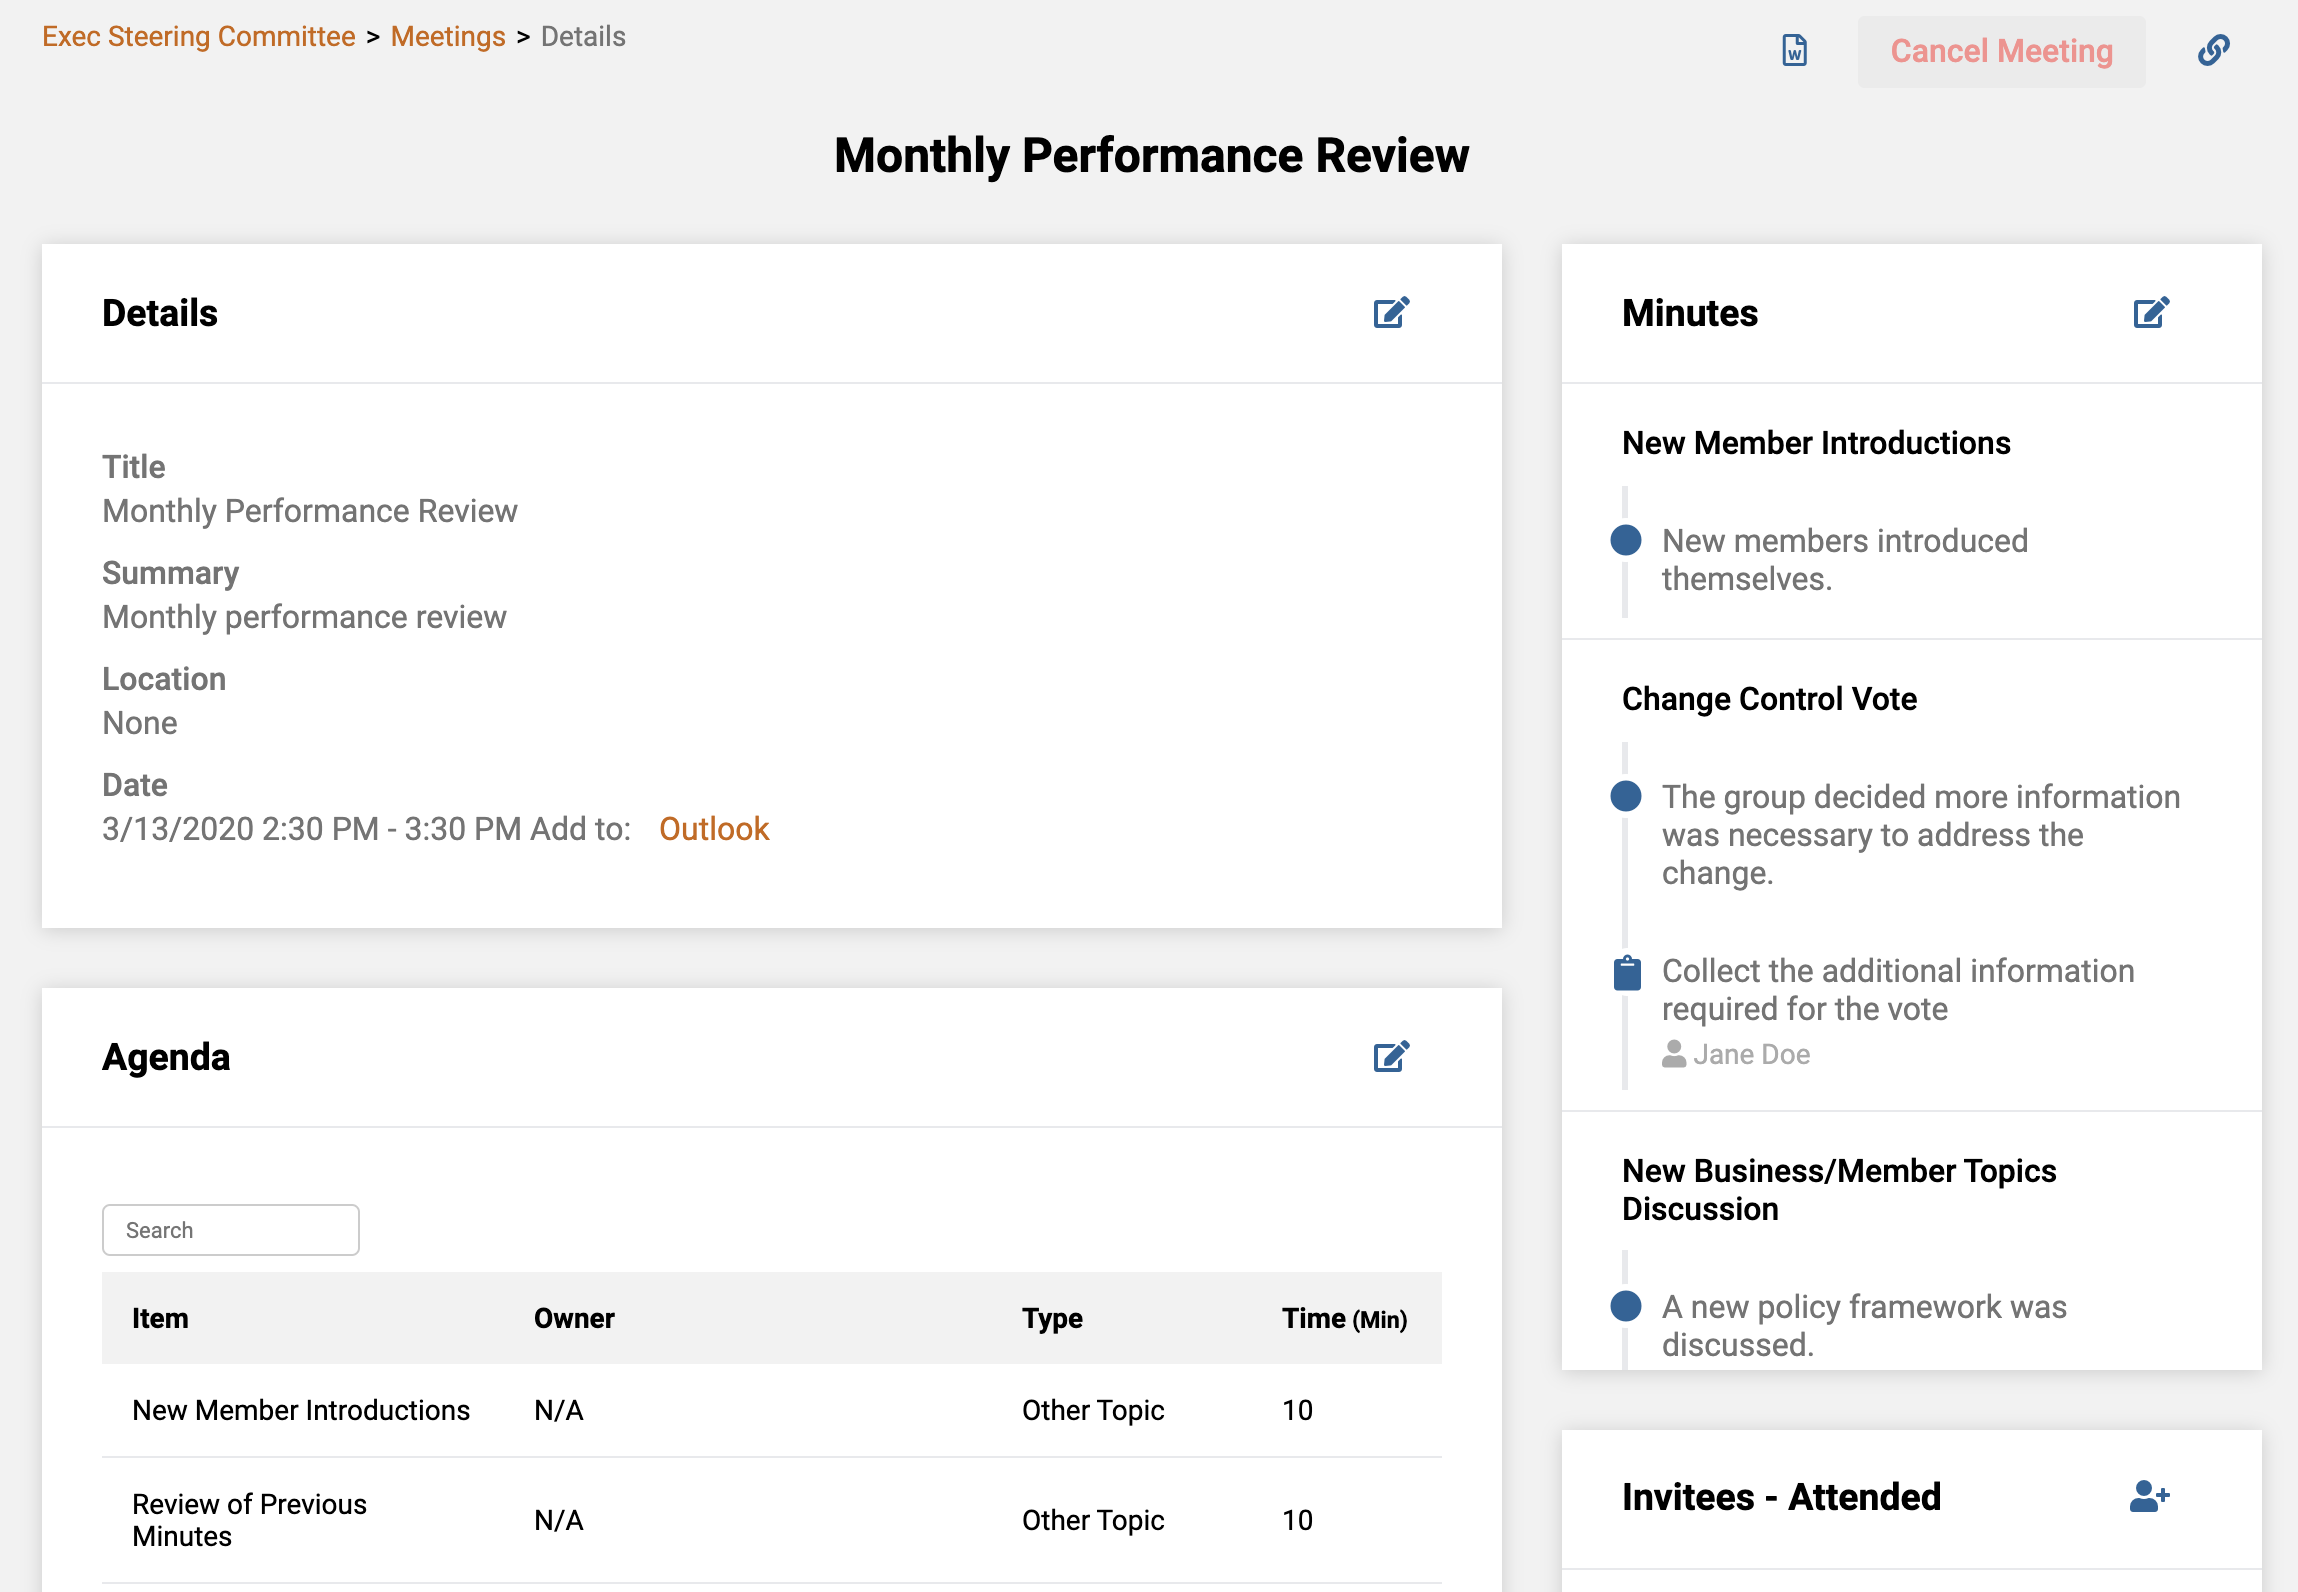 GovernSpot's meetings features include agendas and minutes management